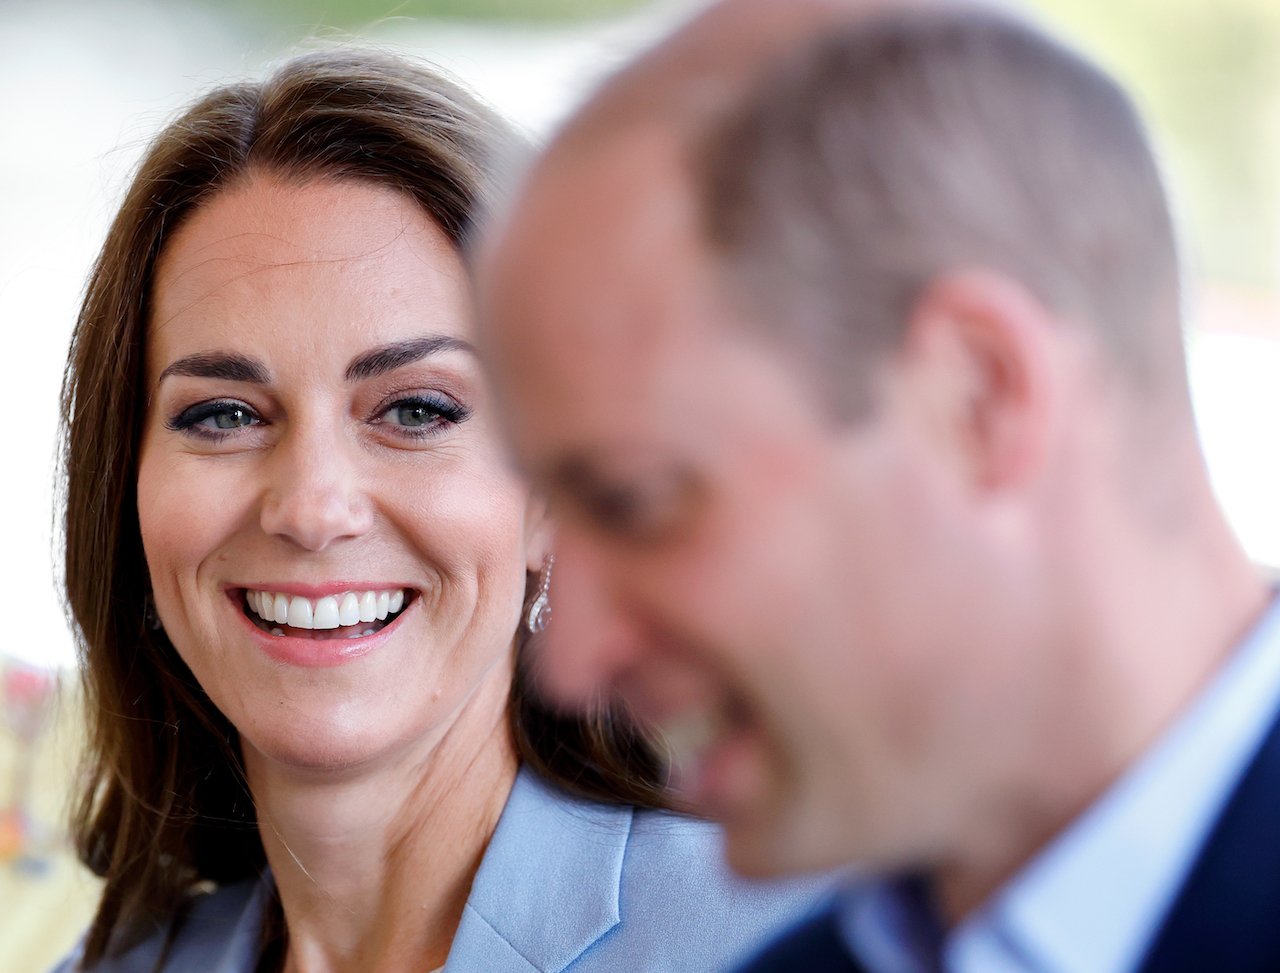 Kate Middleton smiles at Prince William during a museum visit to see their first official joint portrait